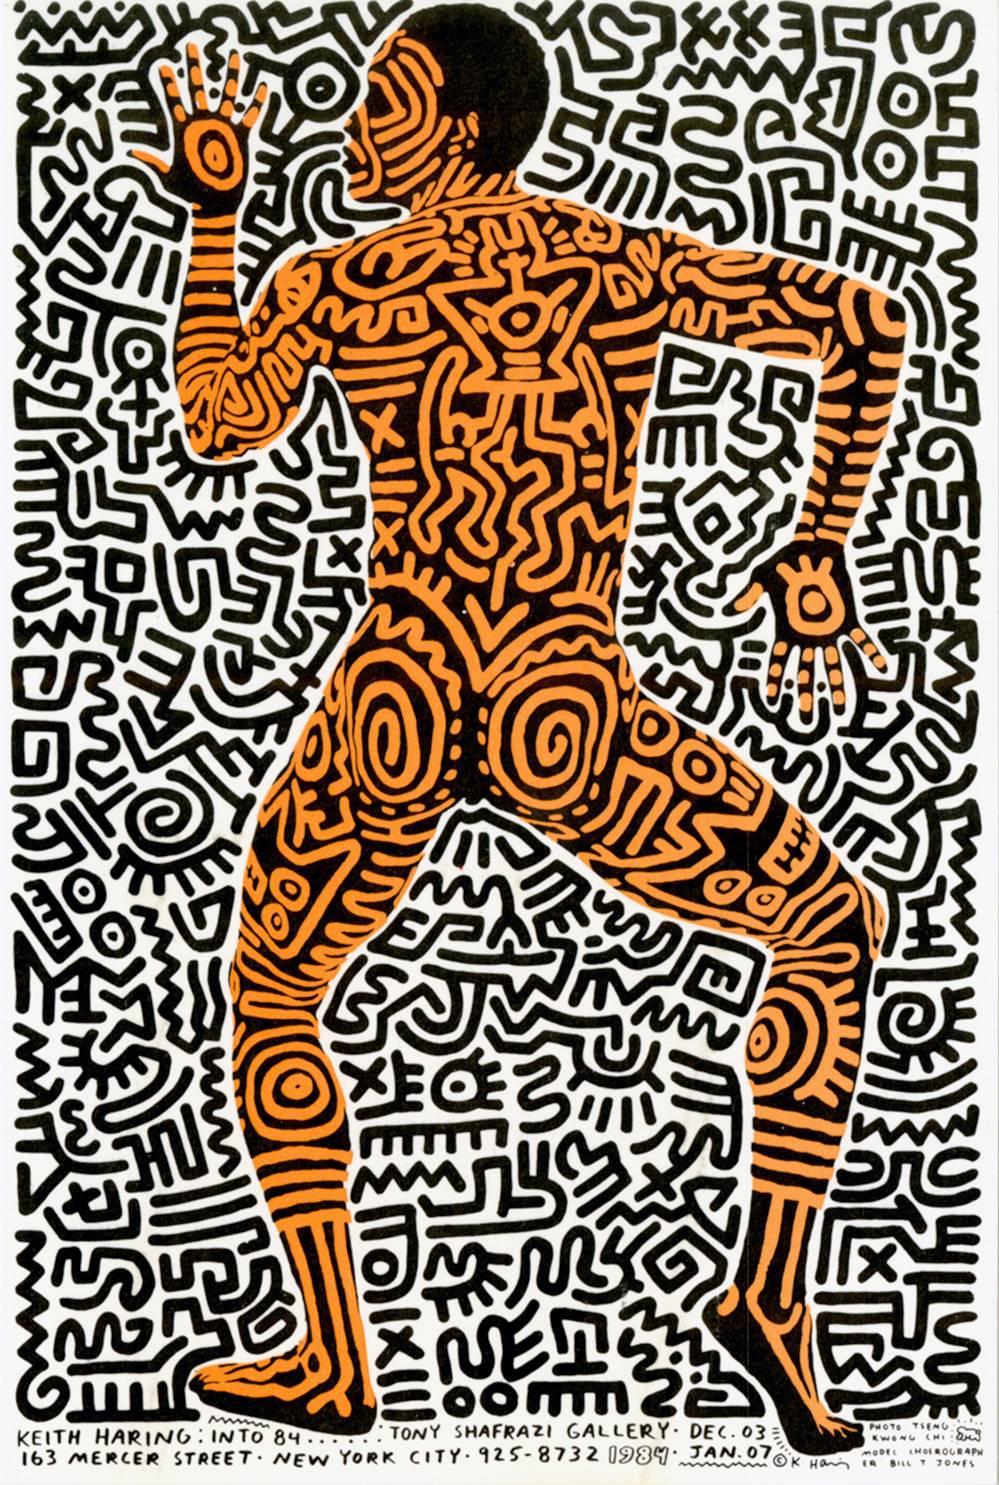 (after) Keith Haring Nude Print - Keith Haring Into 84 (Haring Bill T. Jones Shafrazi announcement card 1983)  